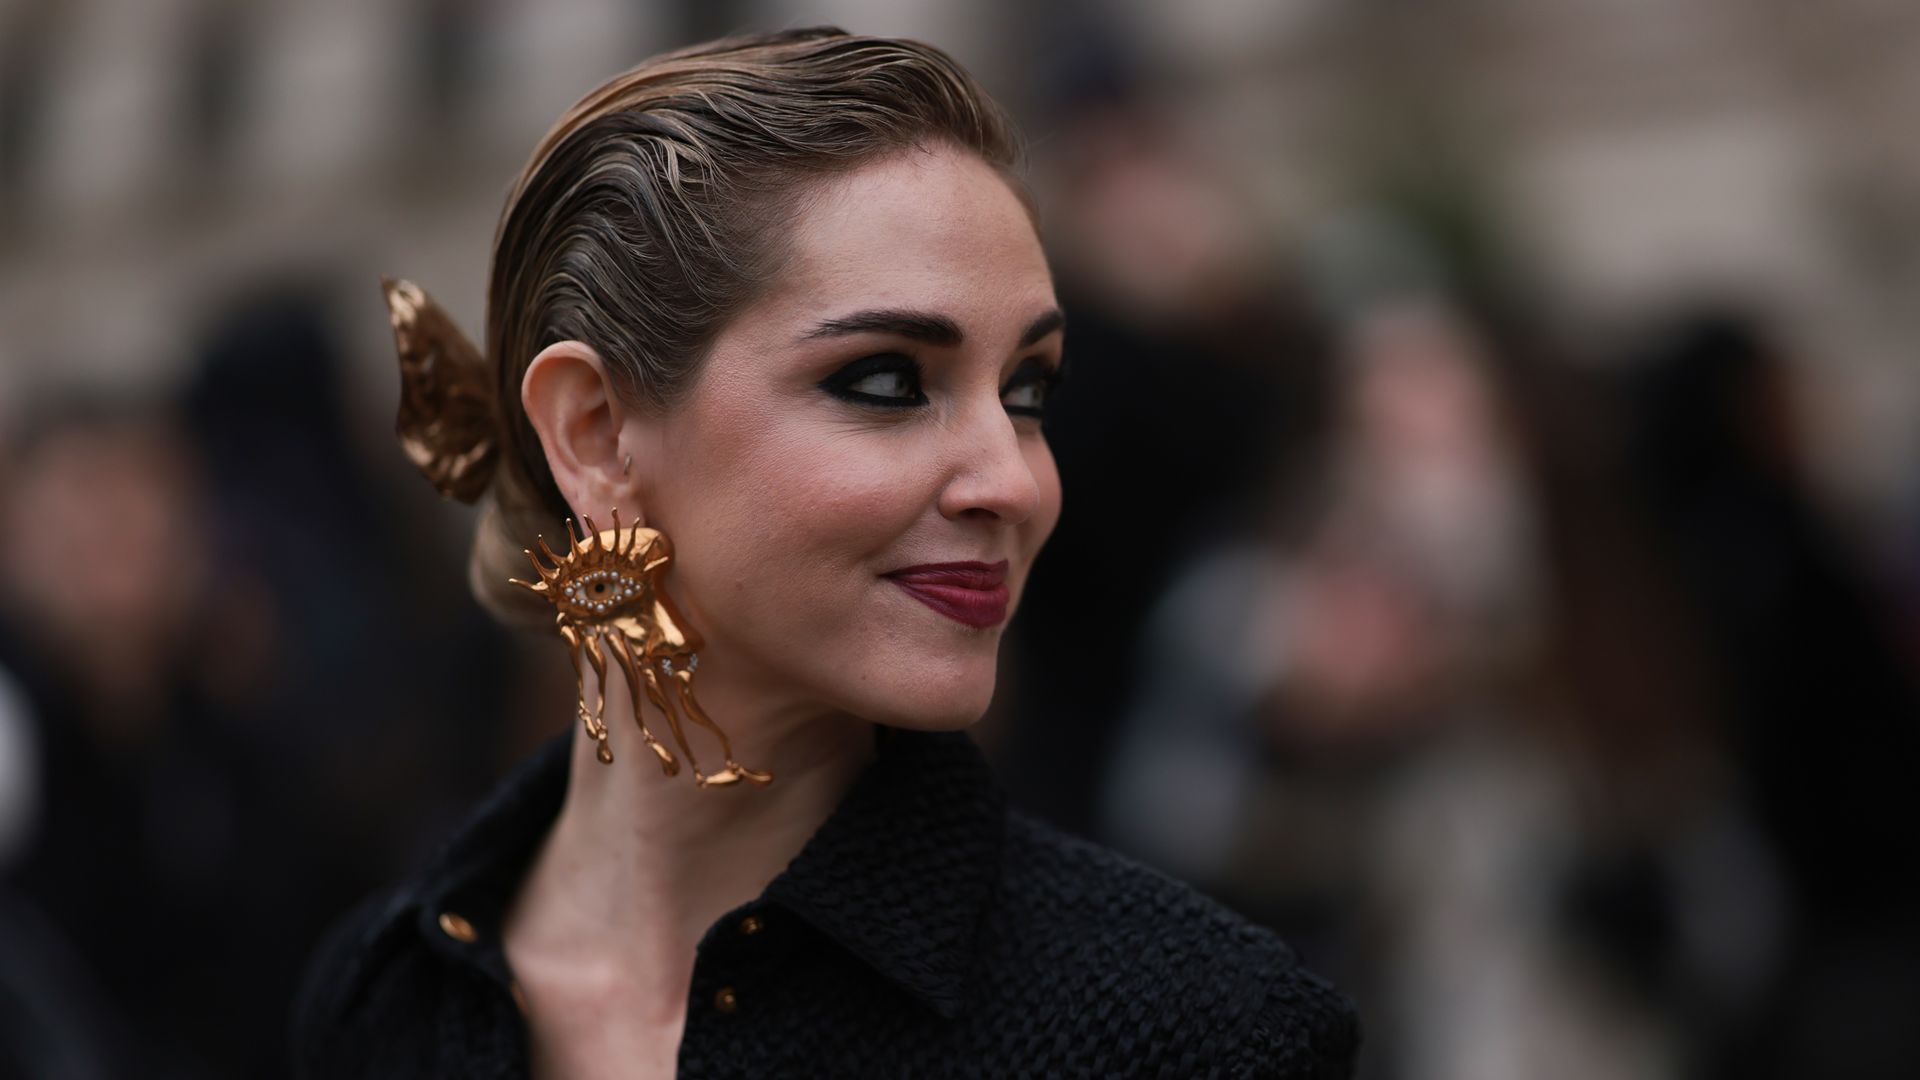 PARIS, FRANCE - JANUARY 23: Chiara Ferragni seen wearing a black blazer and golden Schiaparelli statement earrings and Schiaparelli hairdetails, outside Schiaparelli show, the Paris Fashion Week - Haute Couture Sring Summer 2023 on January 23, 2023 in Paris, France. (Photo by Jeremy Moeller/Getty Images)